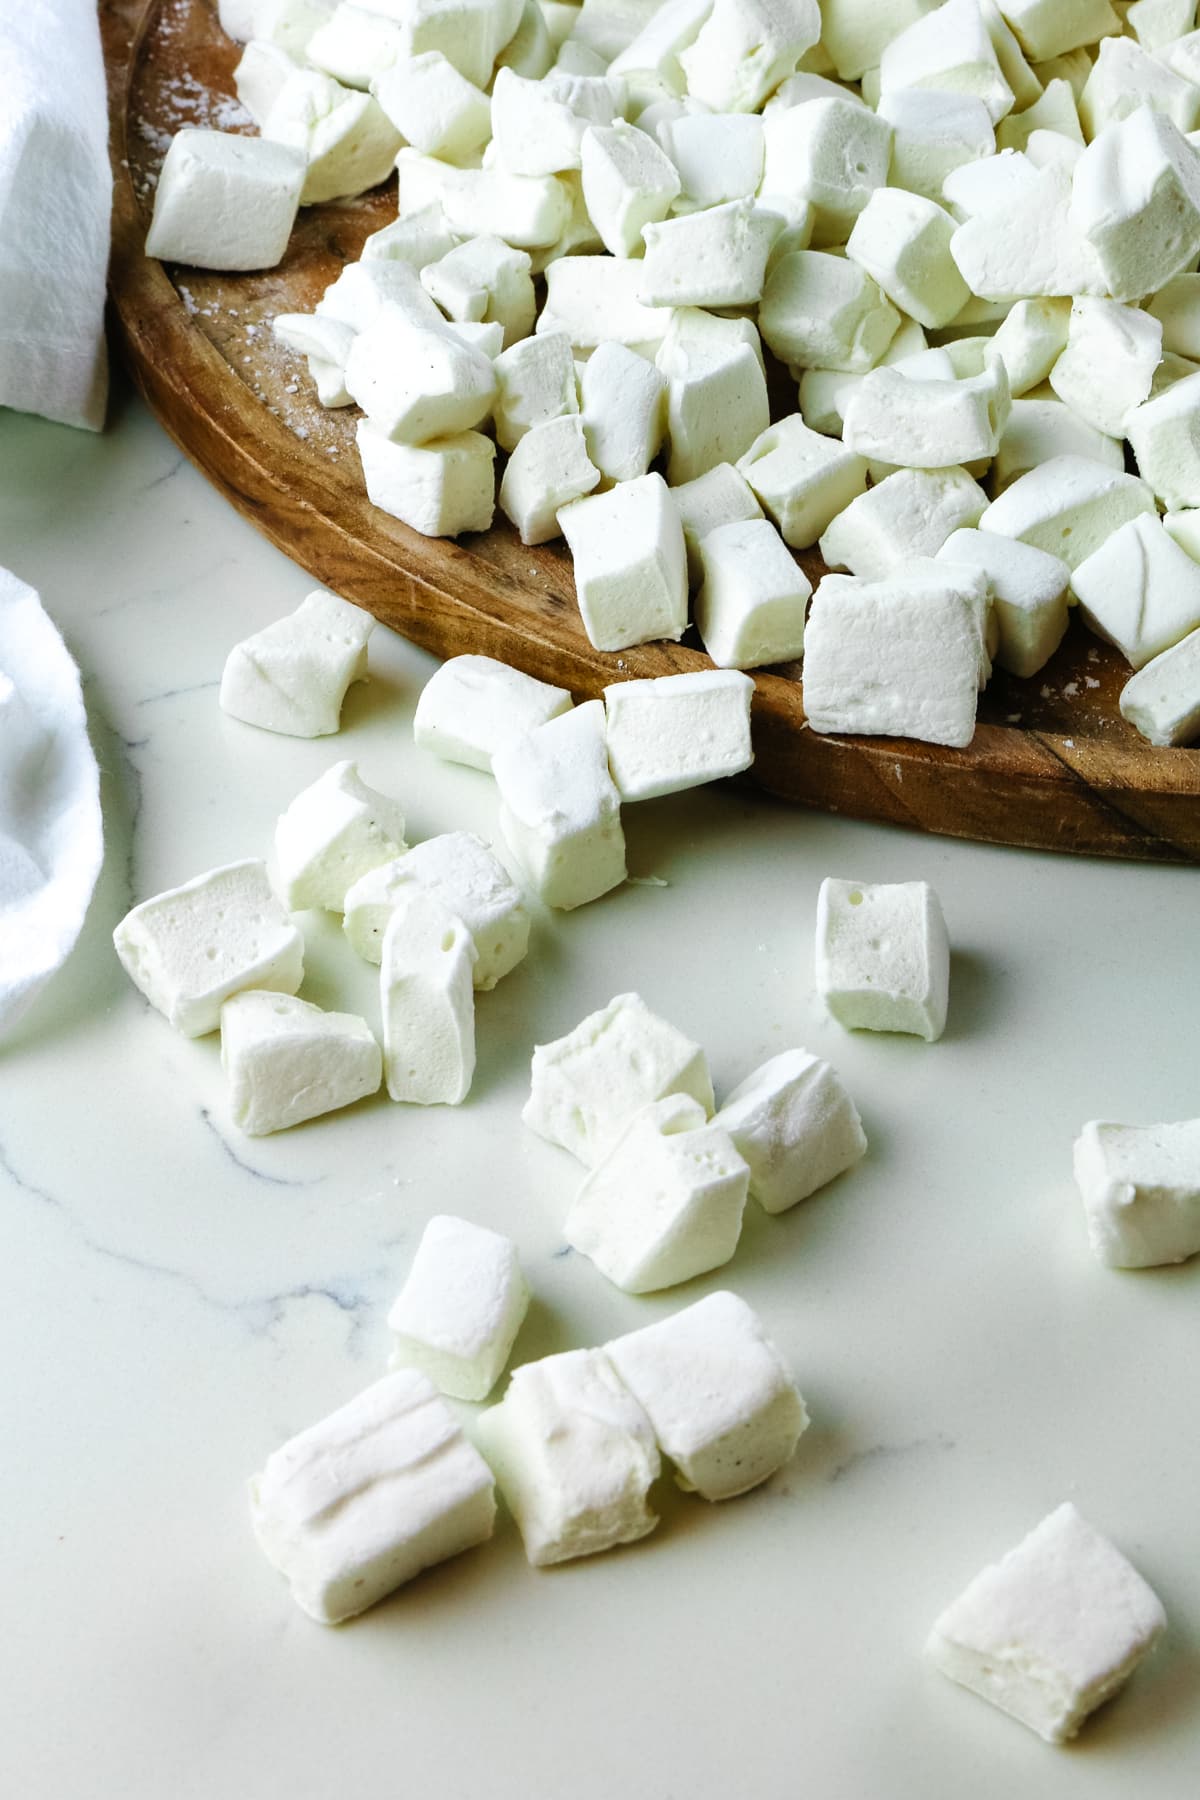 bite-sized homemade marshmallows scattered on a white countertop with a wooden cutting board on the side.